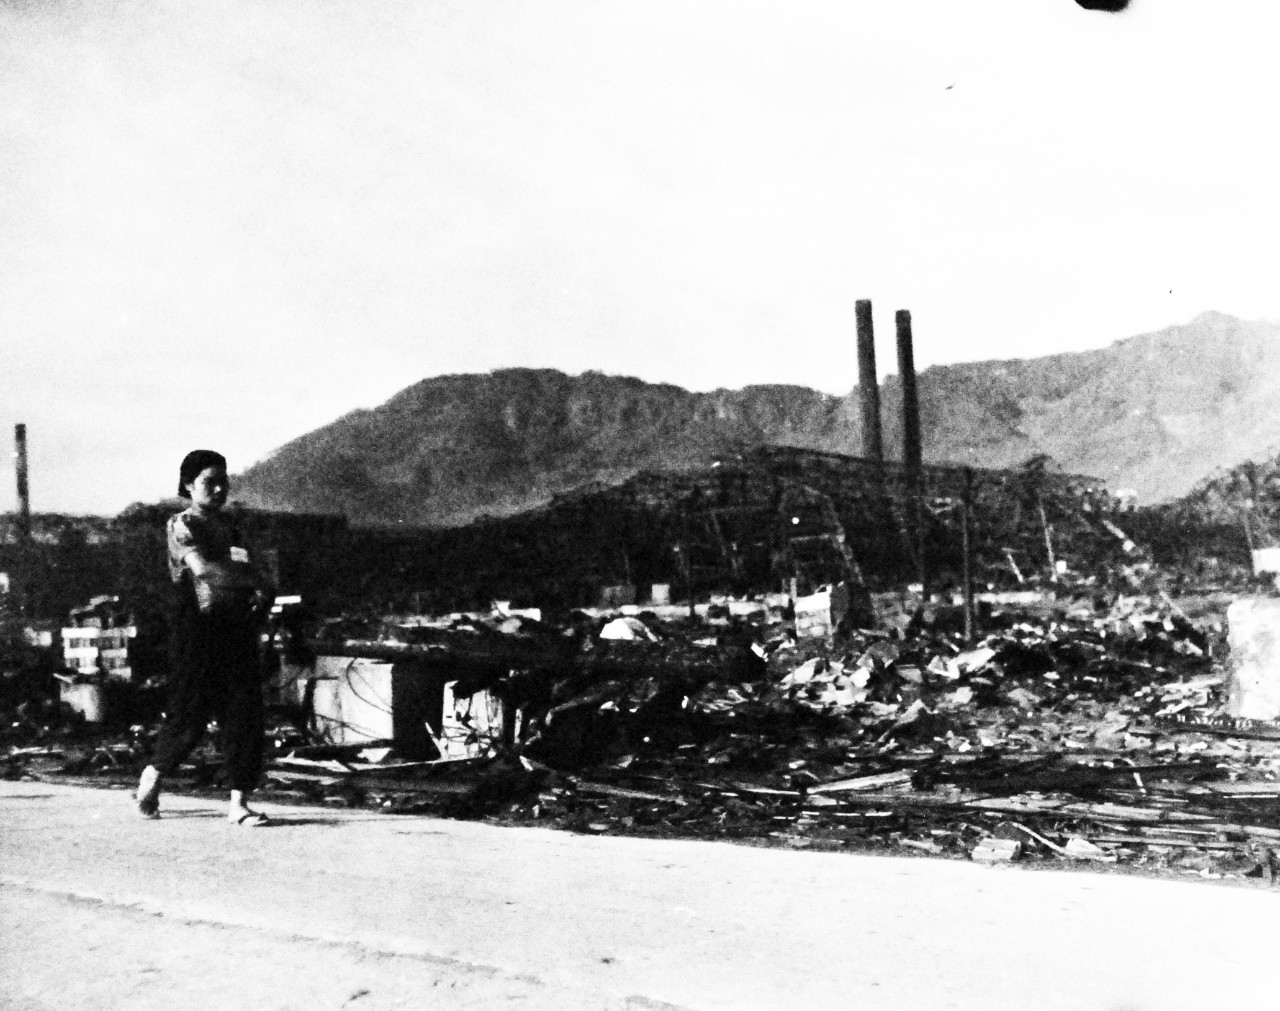 127-GW-1643-136174:     Nagasaki, Japan, 1945.     Mitsubishi Steel and Arms Works as hit by the Atomic Bomb.      Photographed by Goldberg at Nagasaki, Japan, September 24, 1945.        Official U.S. Marine Corps Photograph, now in the collections of the National Archives.  (2016/10/25).